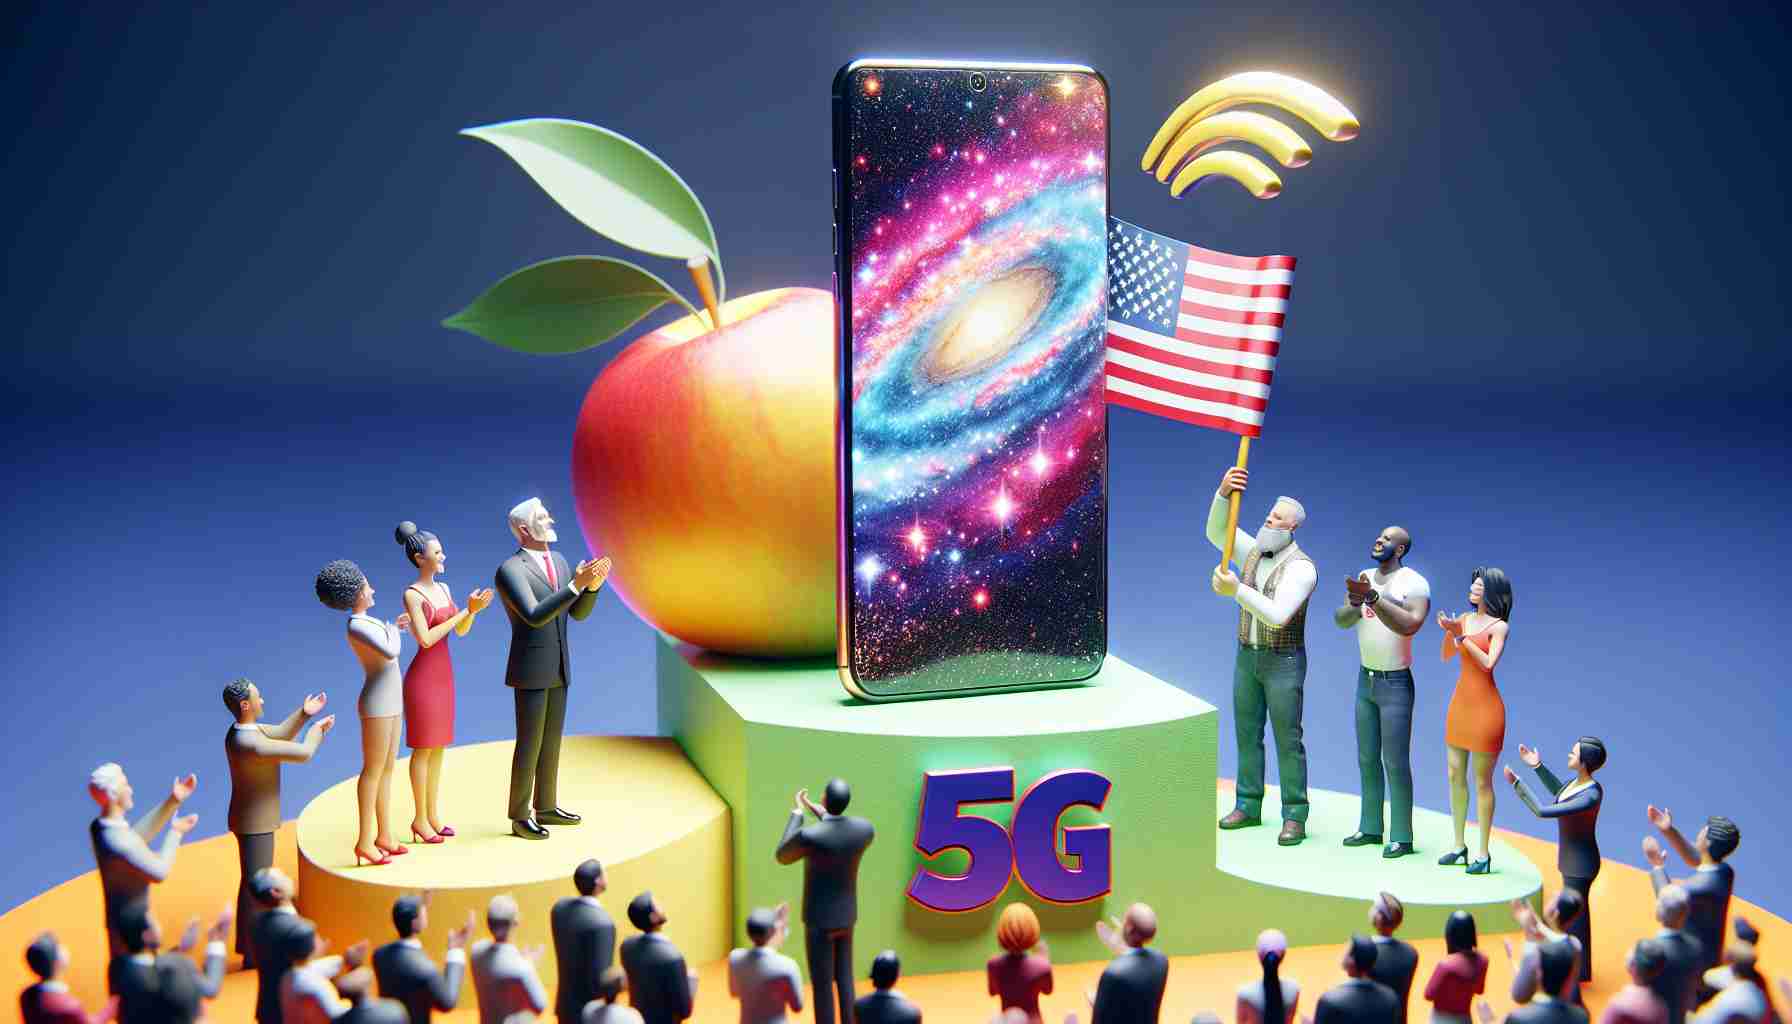 Galaxy Surpasses iPhone in US Consumer Satisfaction for 5G Phones